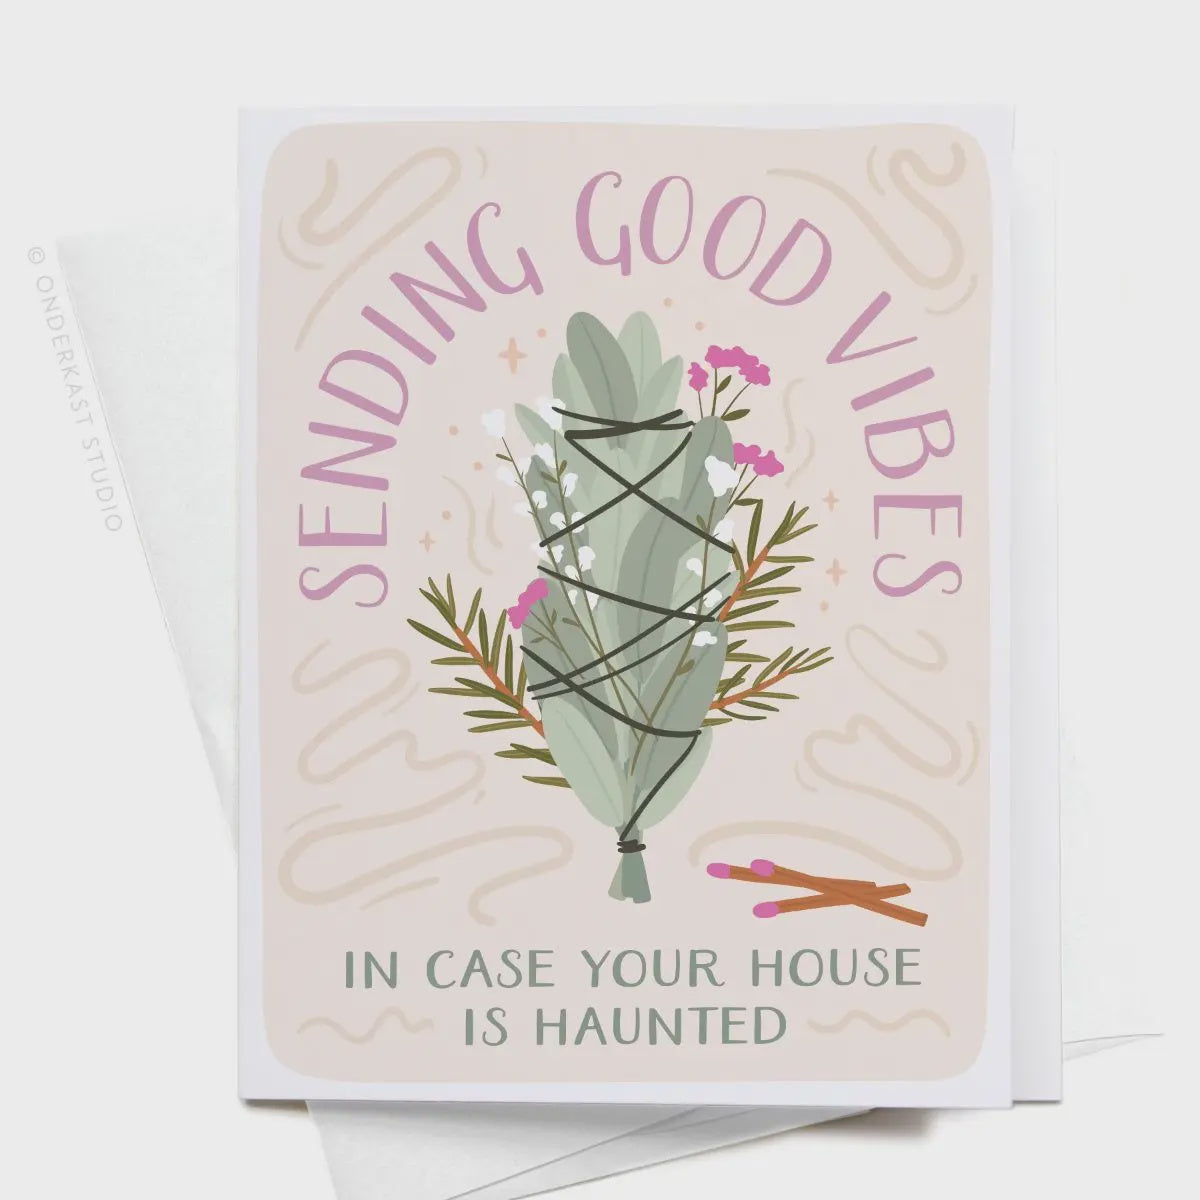 Sending Good Vibes In Case Your House Is Haunted